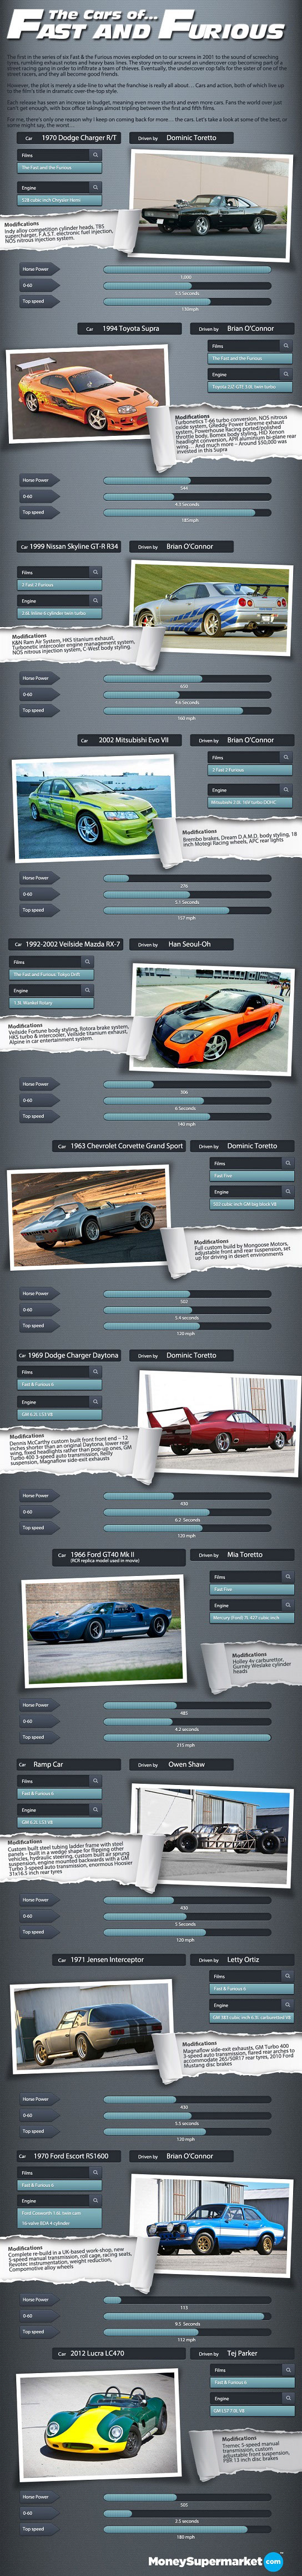 The Fast and The Furious Cars Specs-Infographic